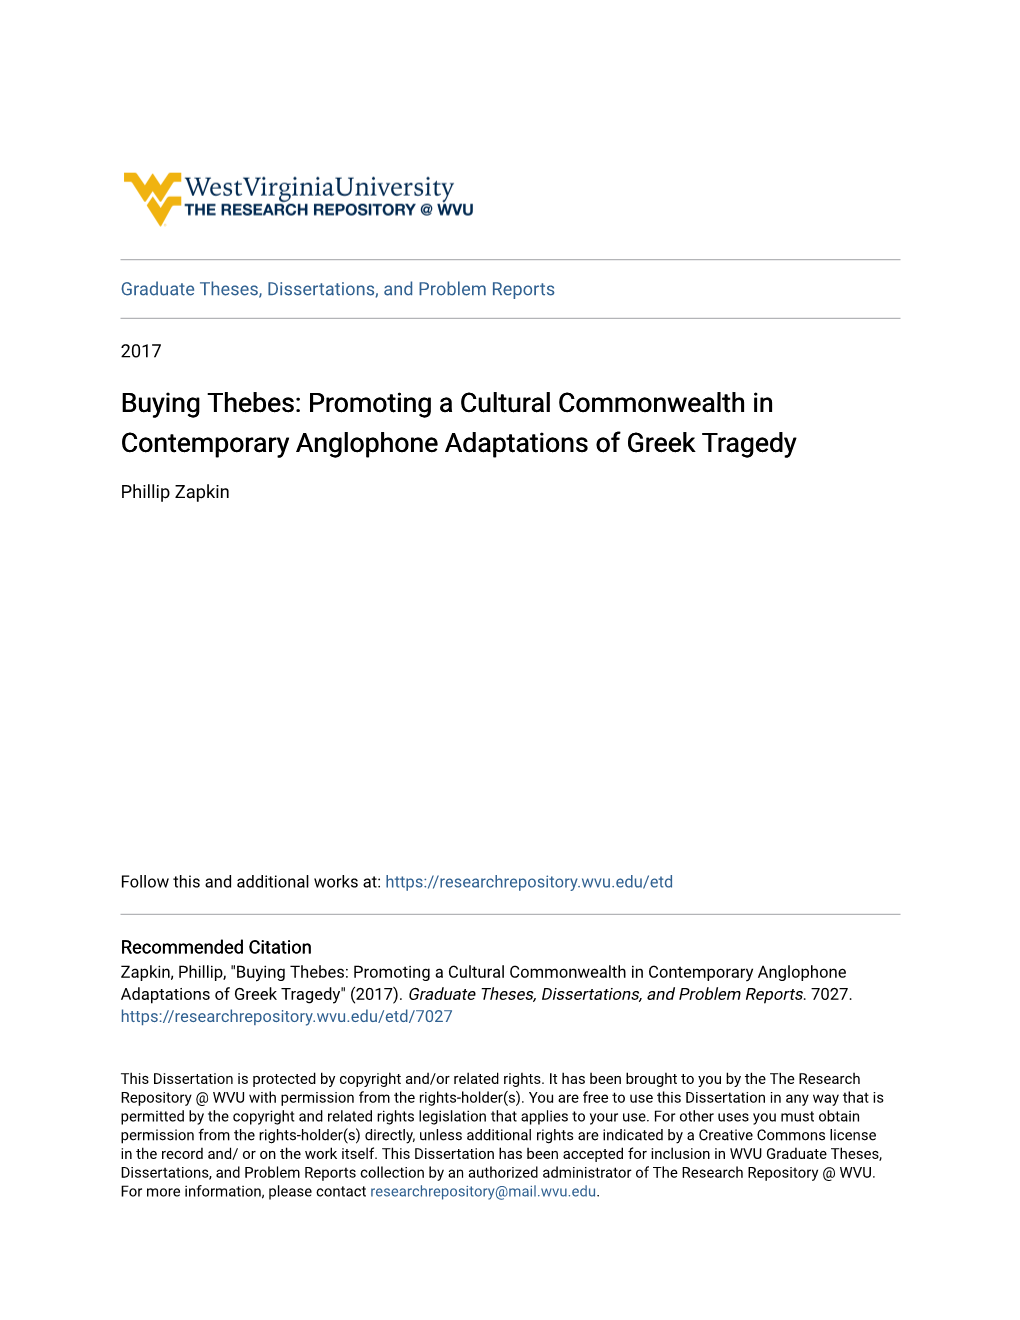 Buying Thebes: Promoting a Cultural Commonwealth in Contemporary Anglophone Adaptations of Greek Tragedy